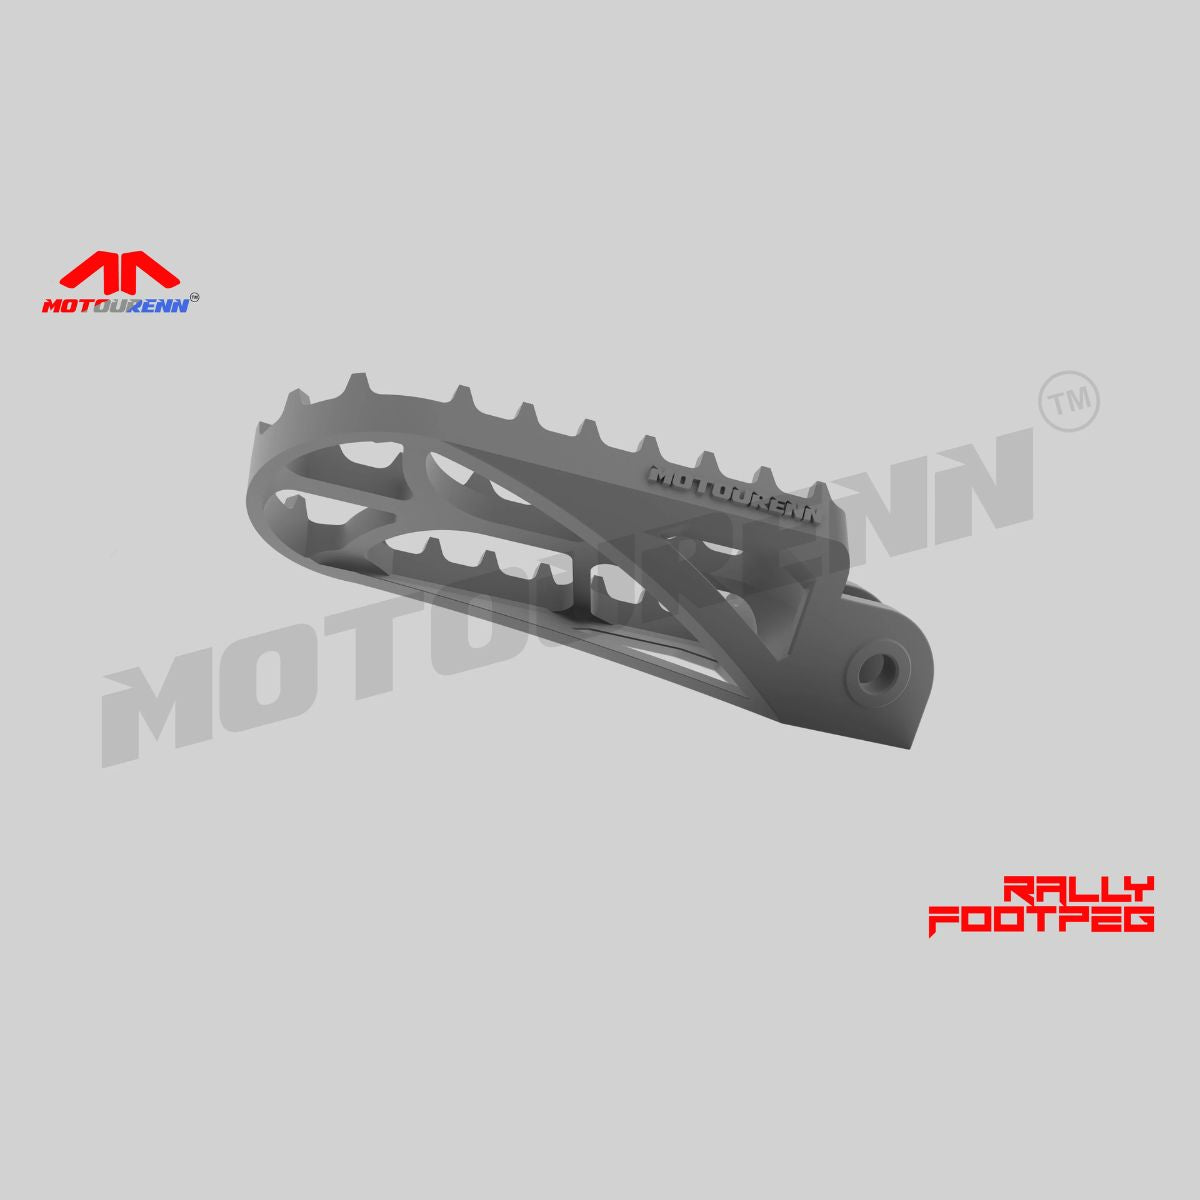 Rally Foot Pegs - 7